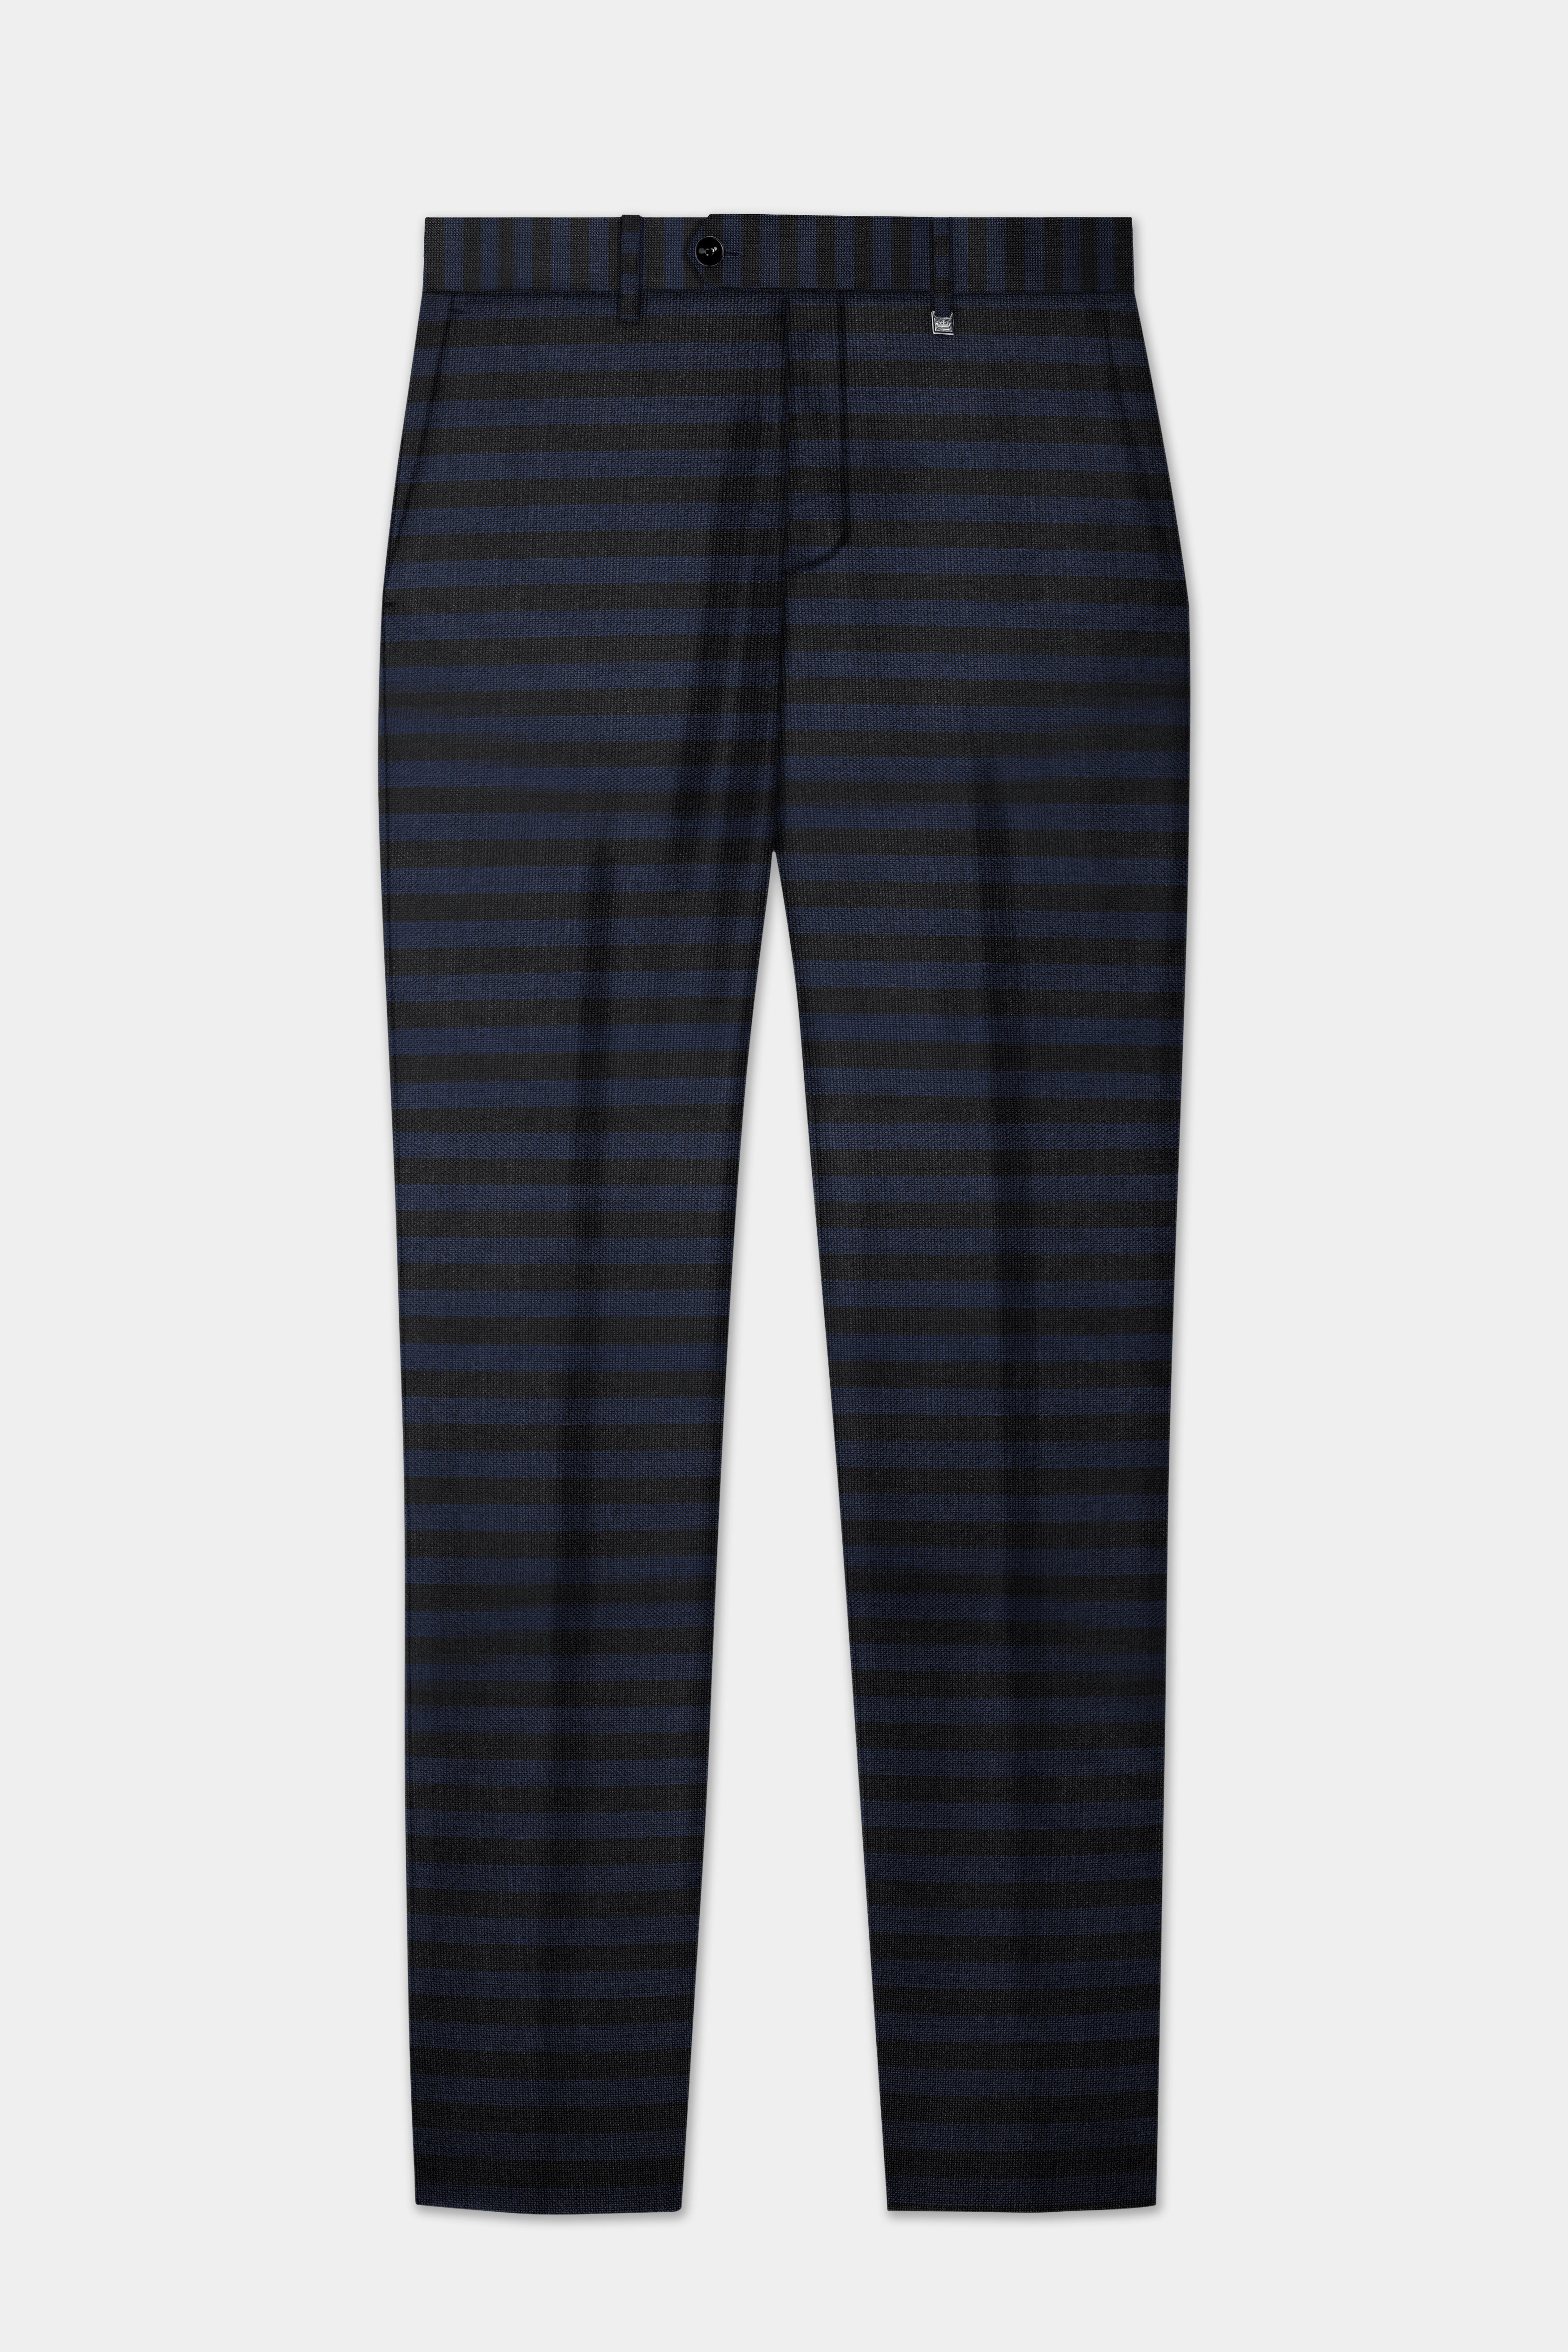 Mirage Blue and Black Striped Wool Blend Pant